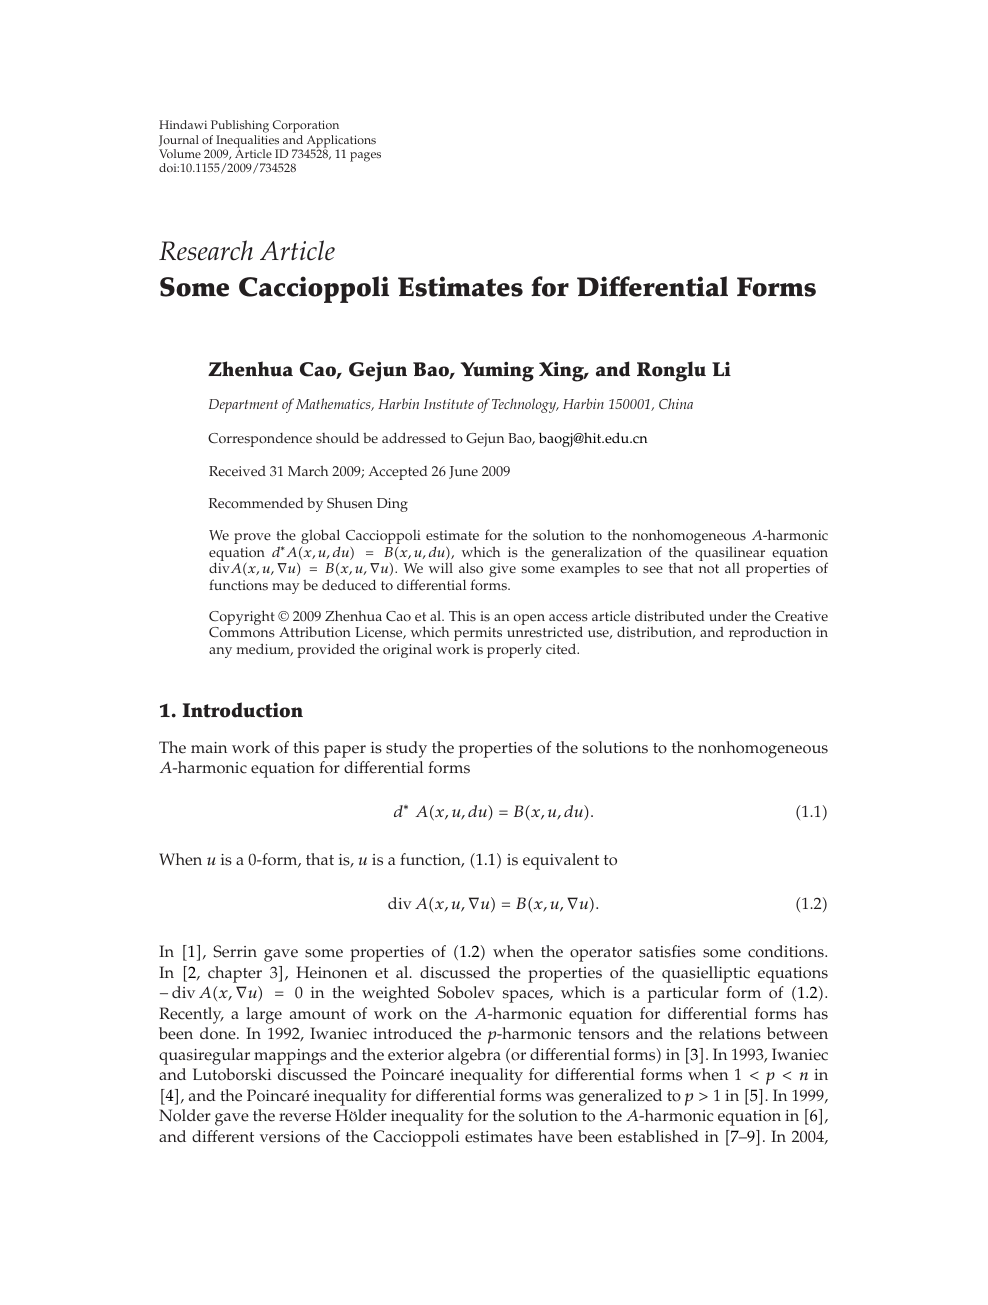 Some Caccioppoli Estimates For Differential Forms Topic Of Research Paper In Mathematics Download Scholarly Article Pdf And Read For Free On Cyberleninka Open Science Hub